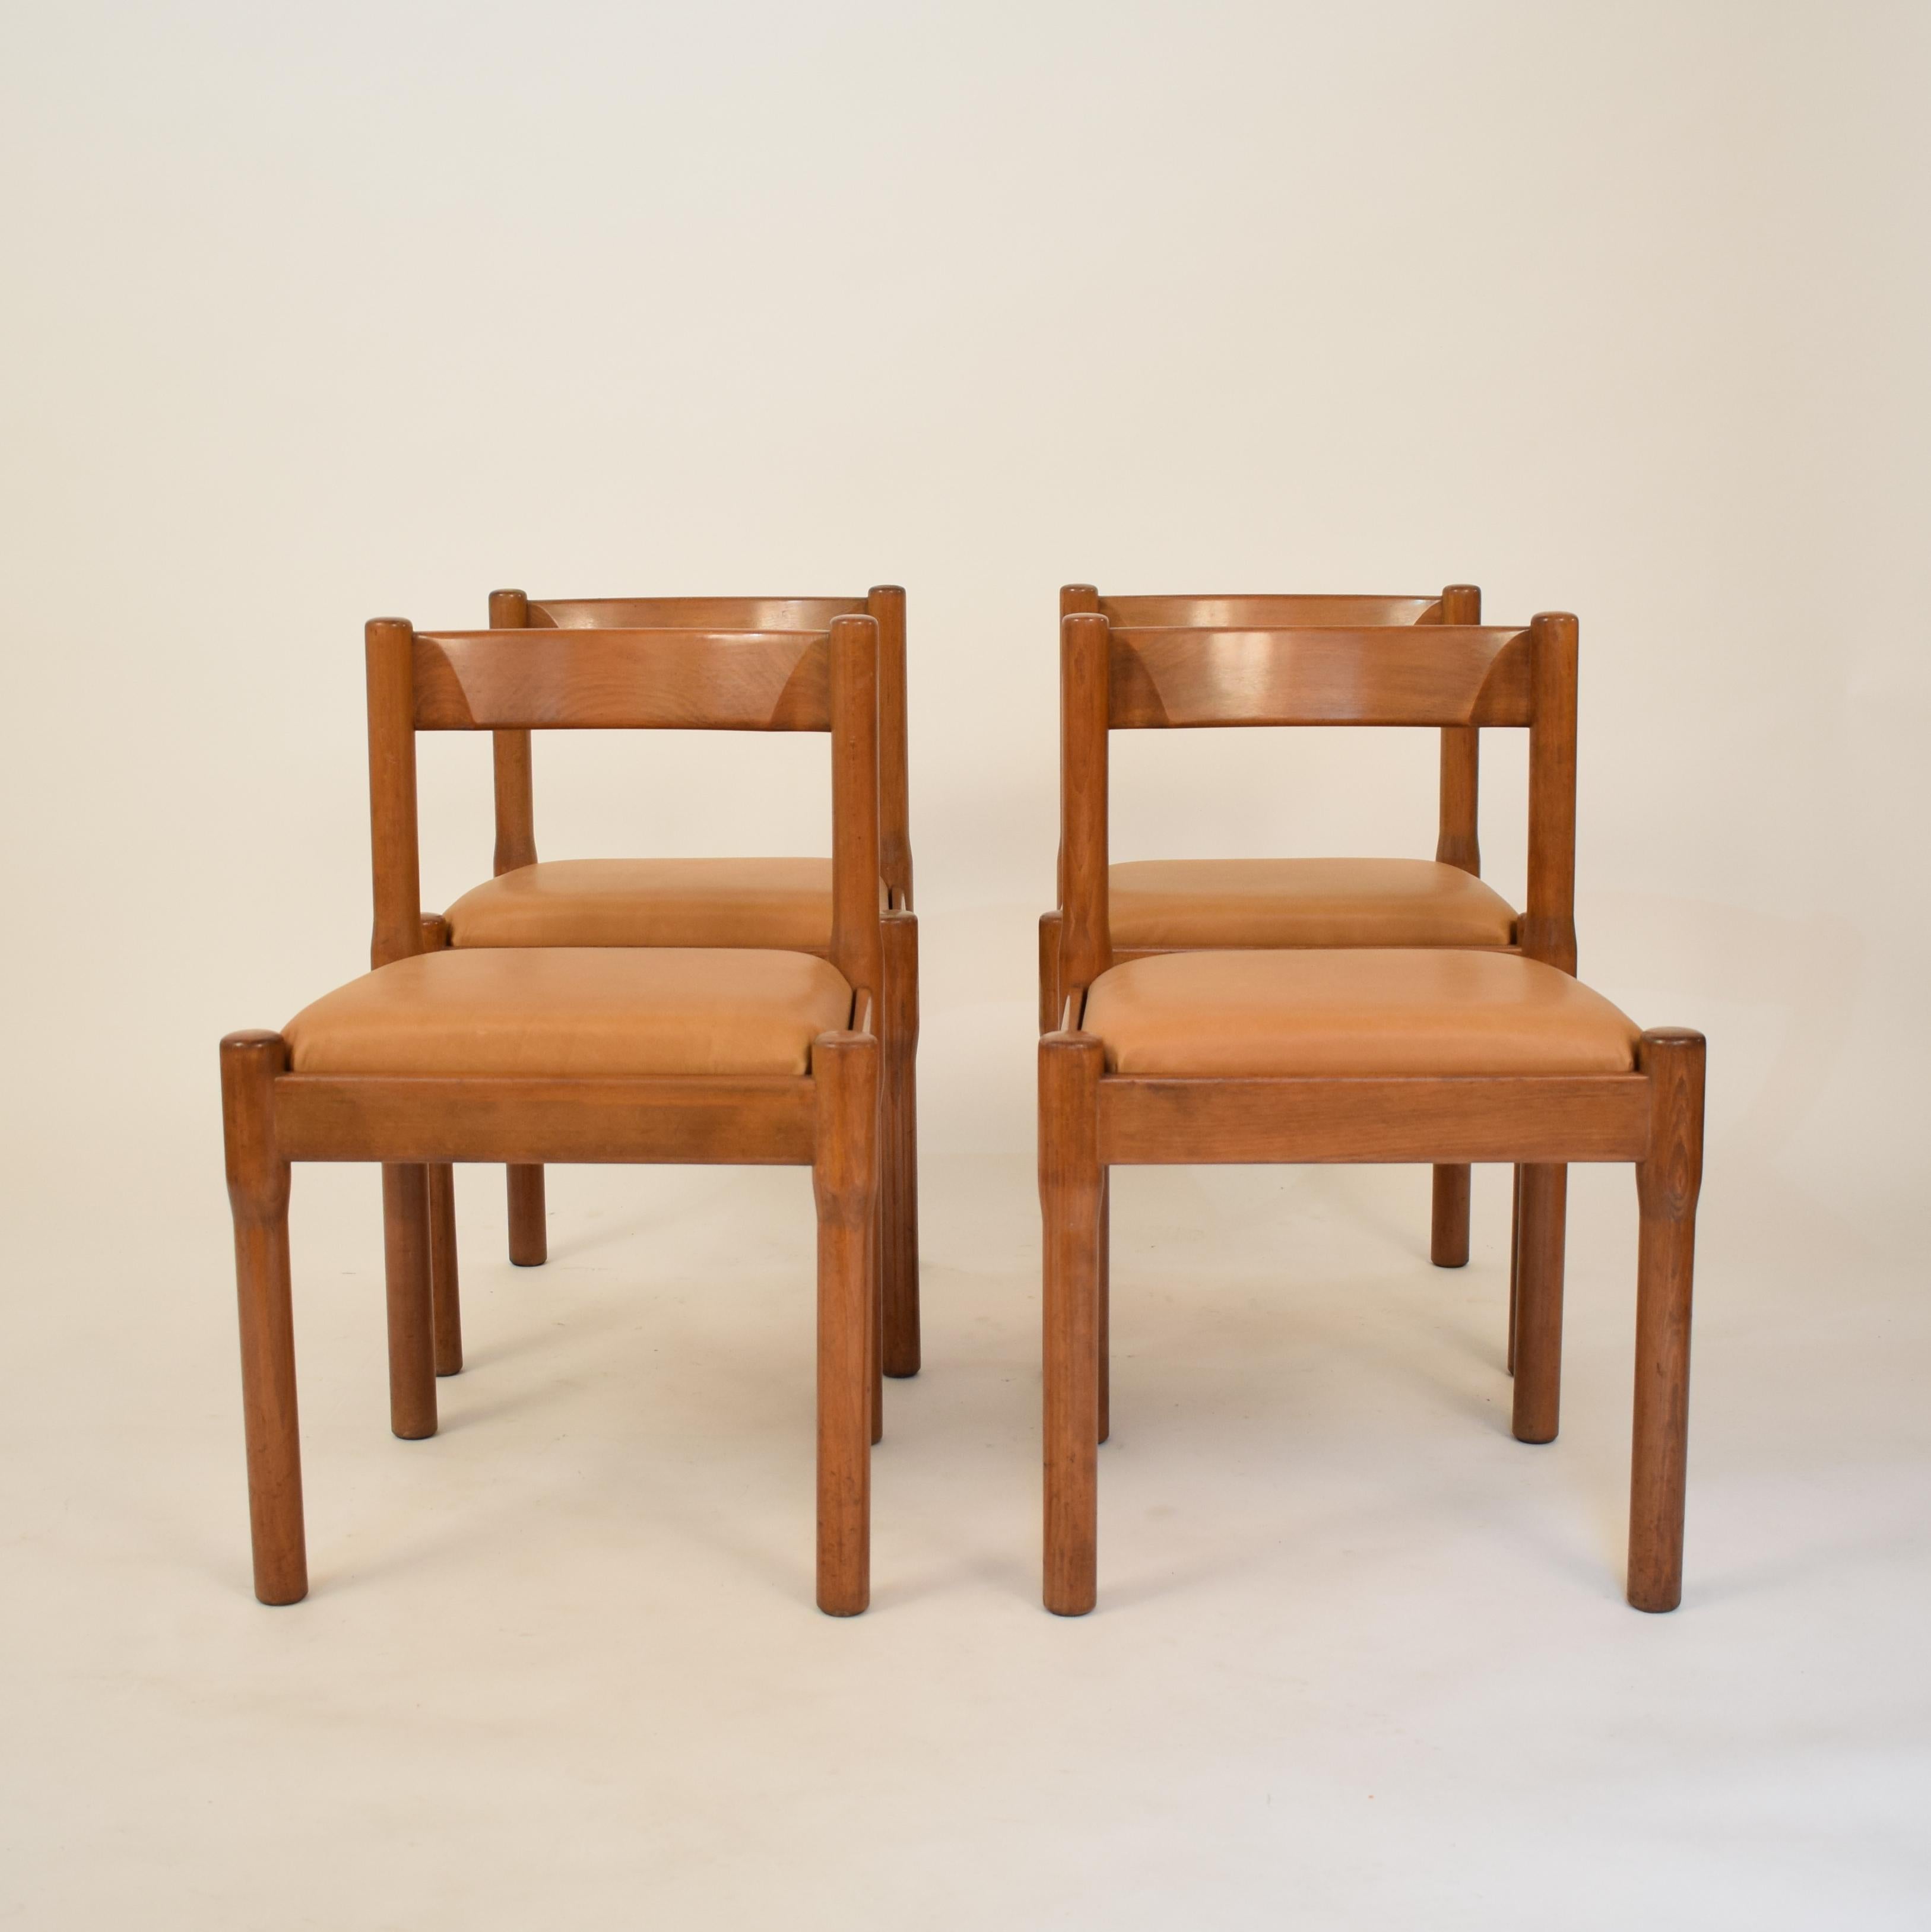 This beautiful set of four Mid Century dining chairs by Vico Magistretti where produced by Cassina (each chair is stamped) around 1960.
The Model is called Carimate and they are made out of beech. The upholstery got redone in very smooth light brown